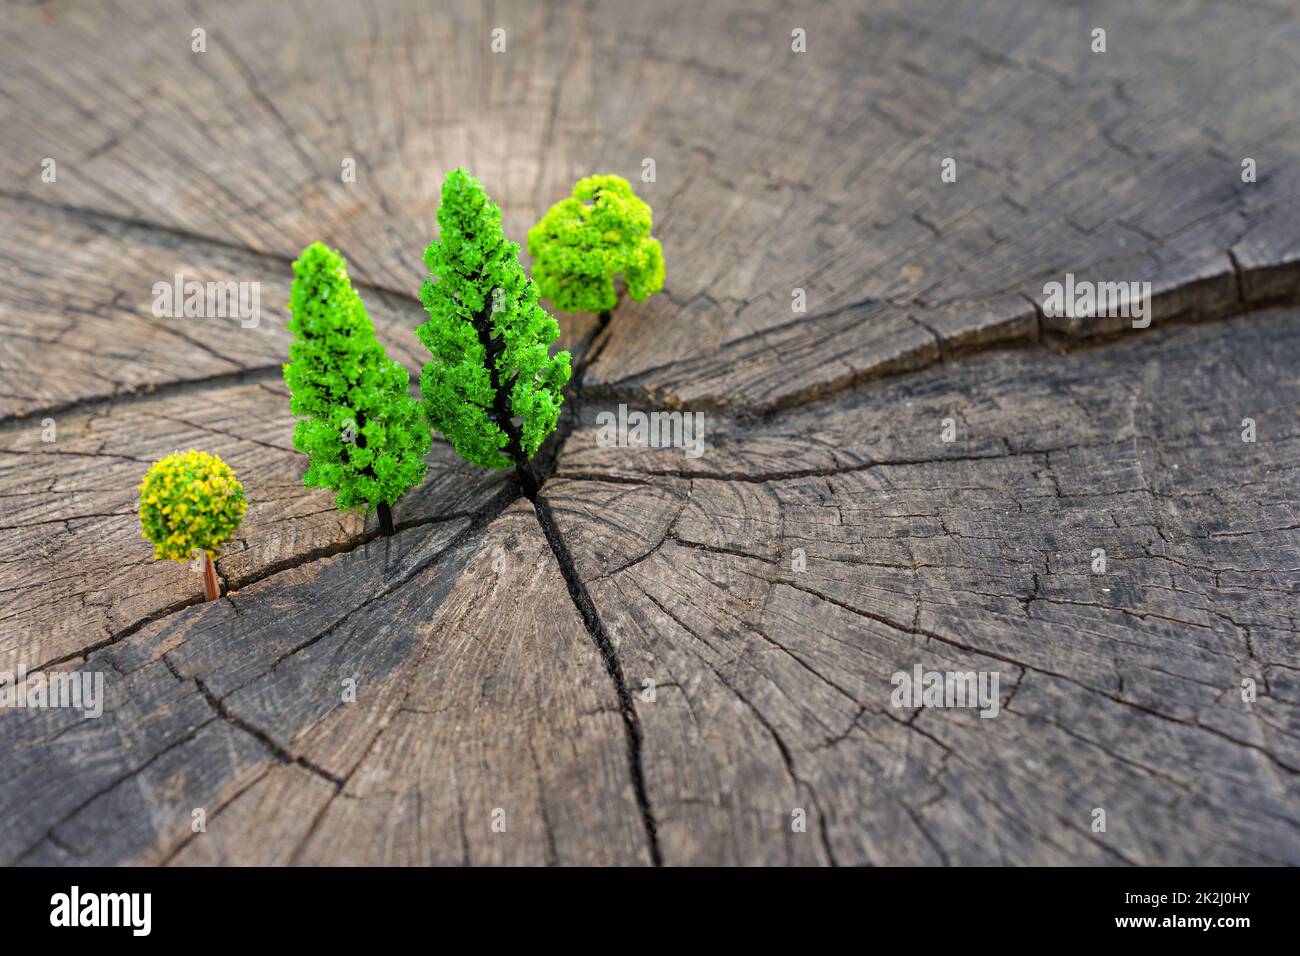 Miniature toy trees placed on a large tree stump, close-up. Creative reforestation concept. Stock Photo